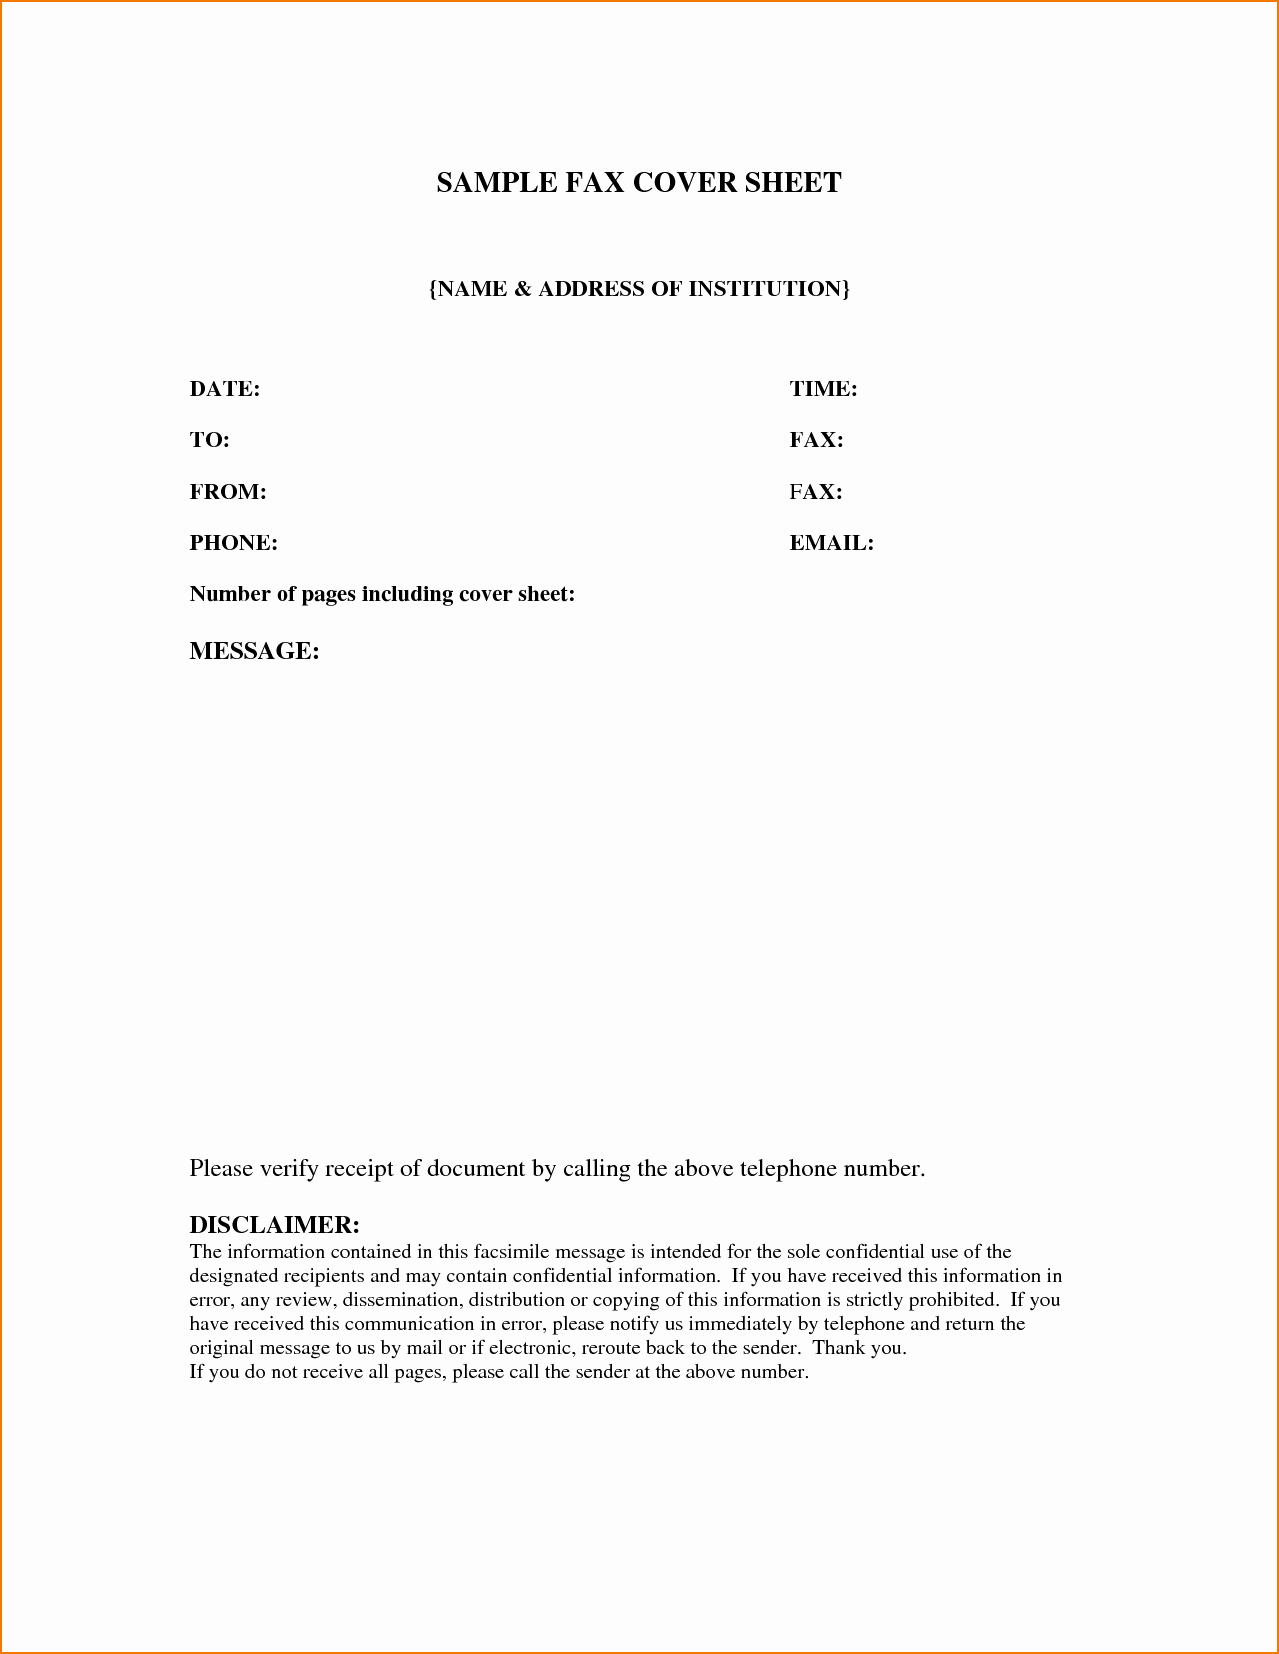 Examples Of Fax Cover Sheets Lovely 5 Fax Cover Sample